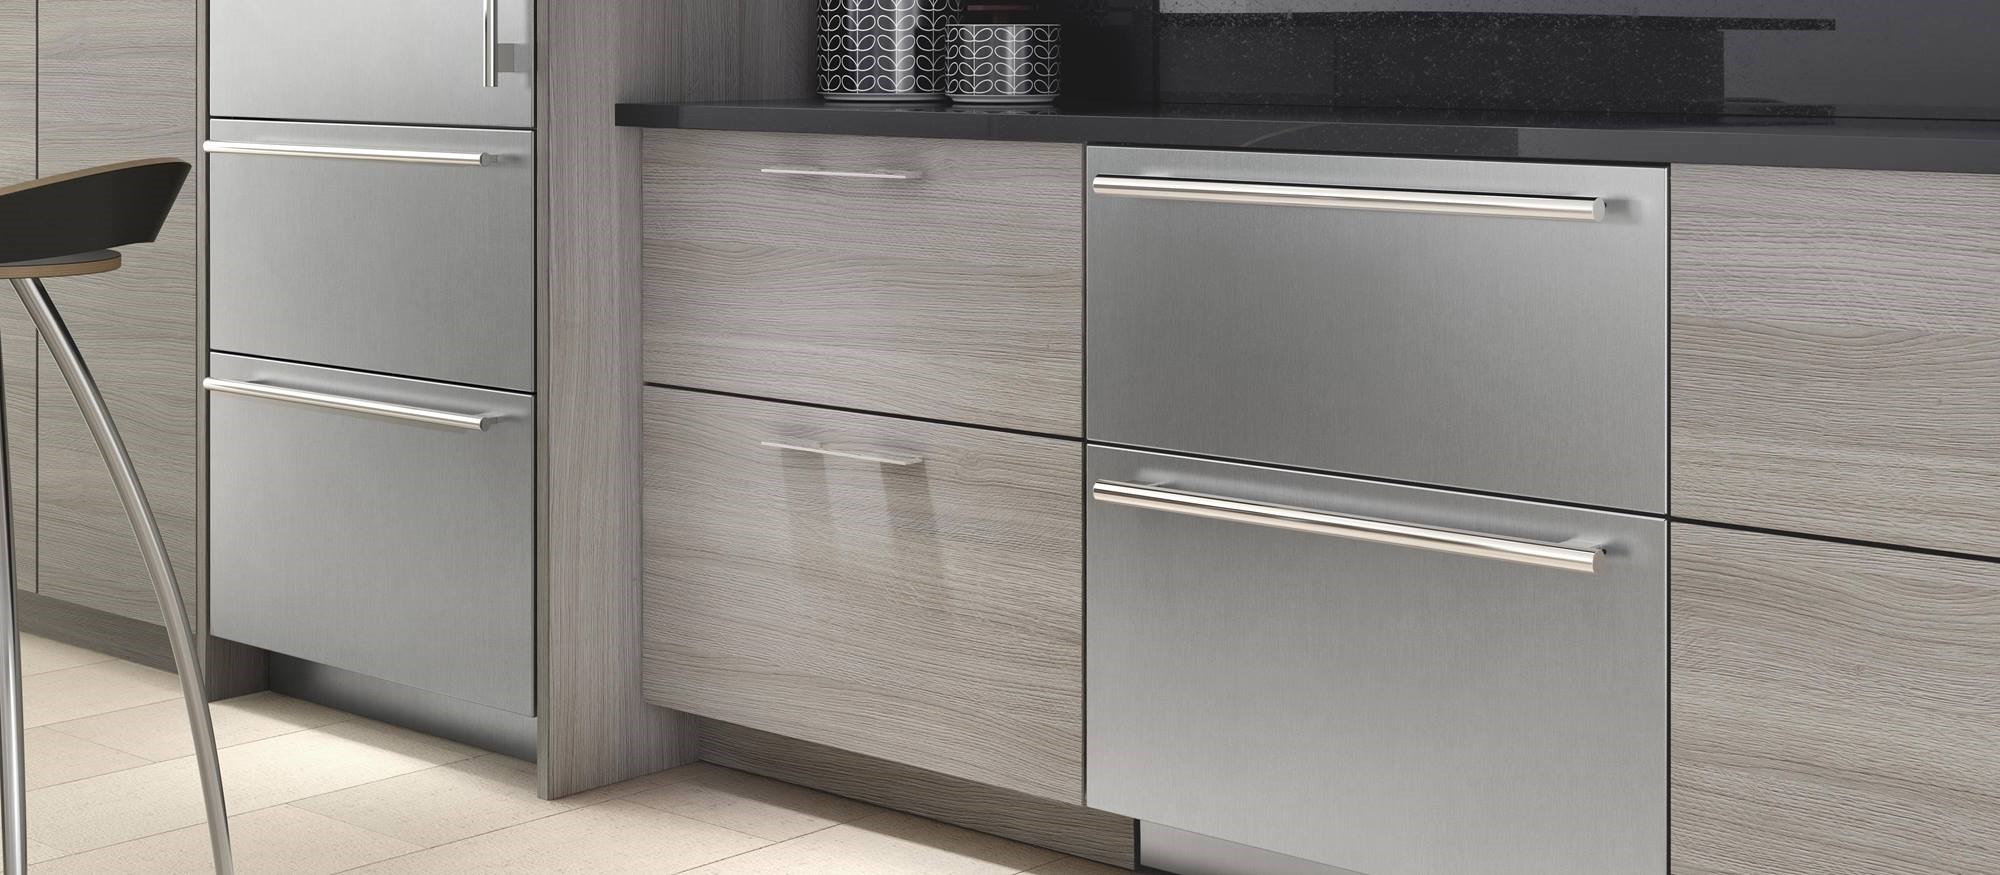 4 Reasons Drawer Refrigerators Are The Best Choice Vs Under